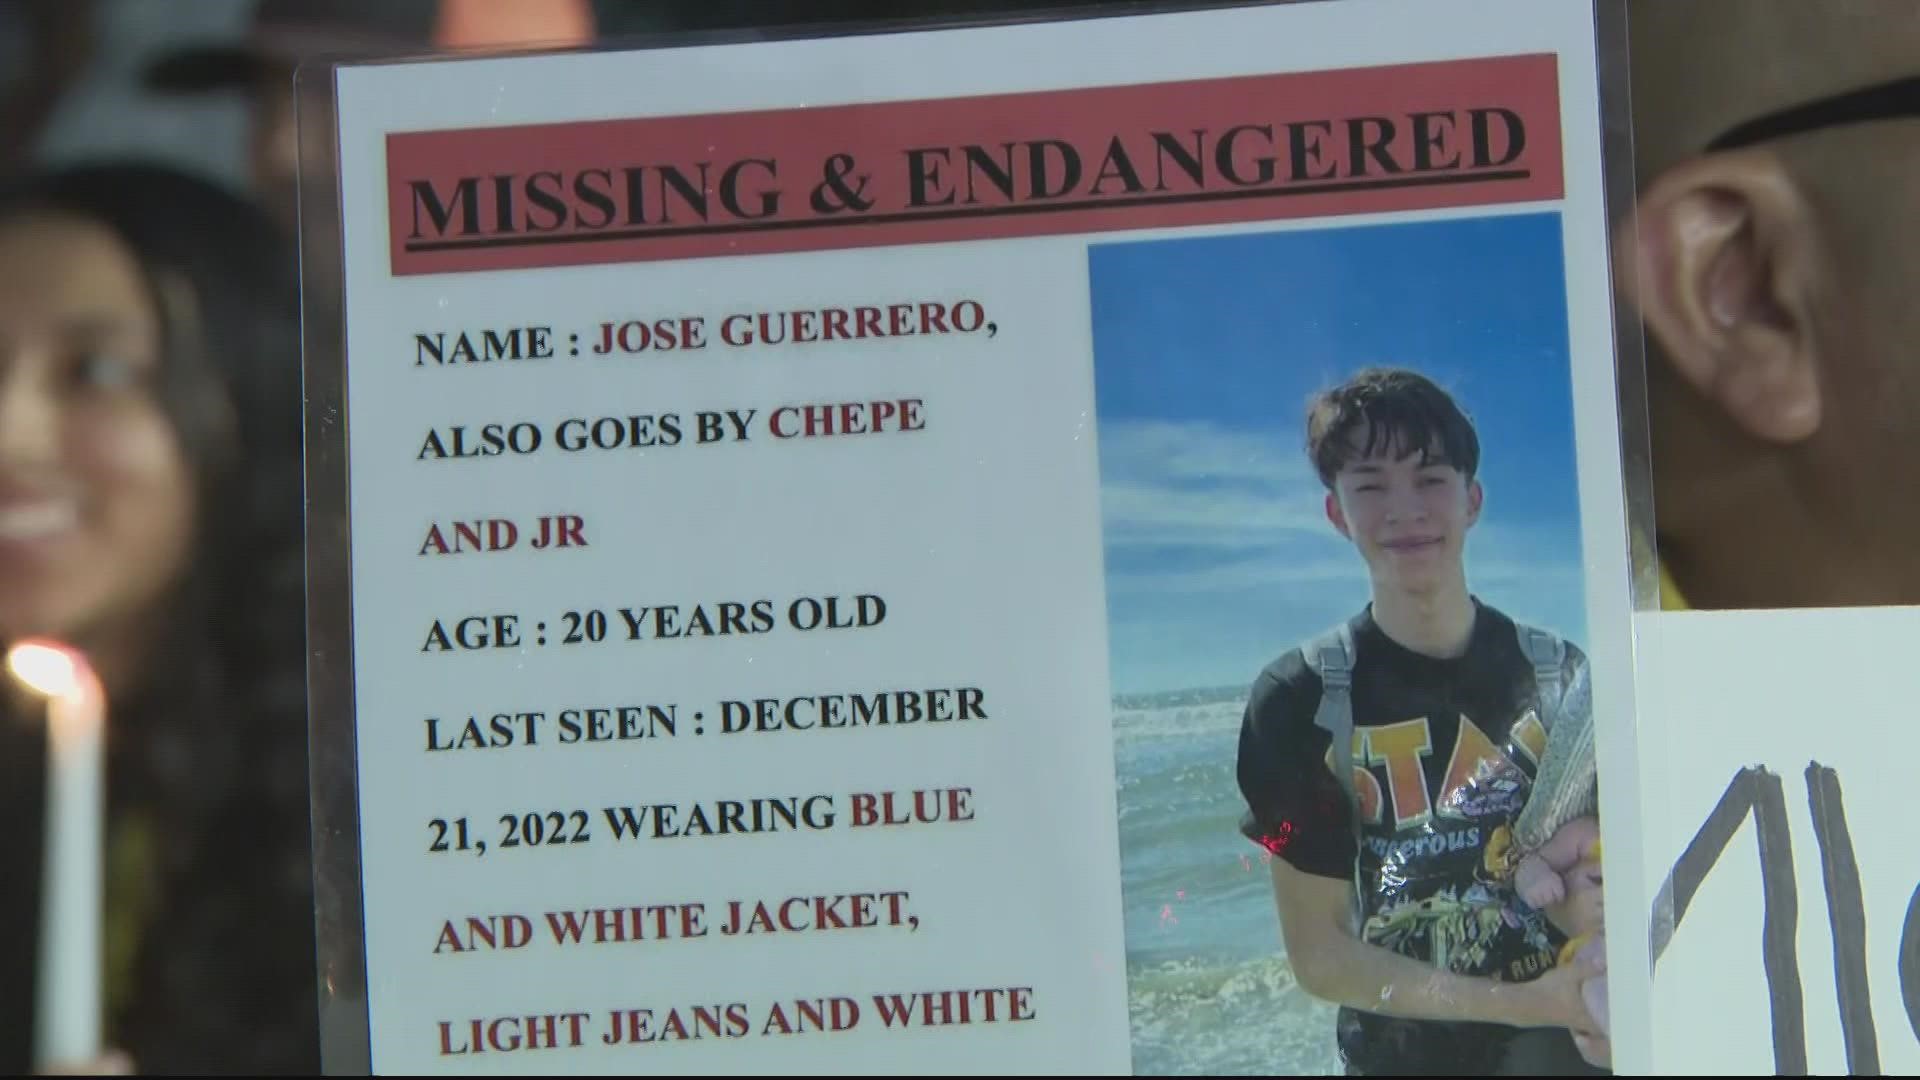 Jose Guerrero, 20, was reported missing on December 21. His family and police continue to search for him.